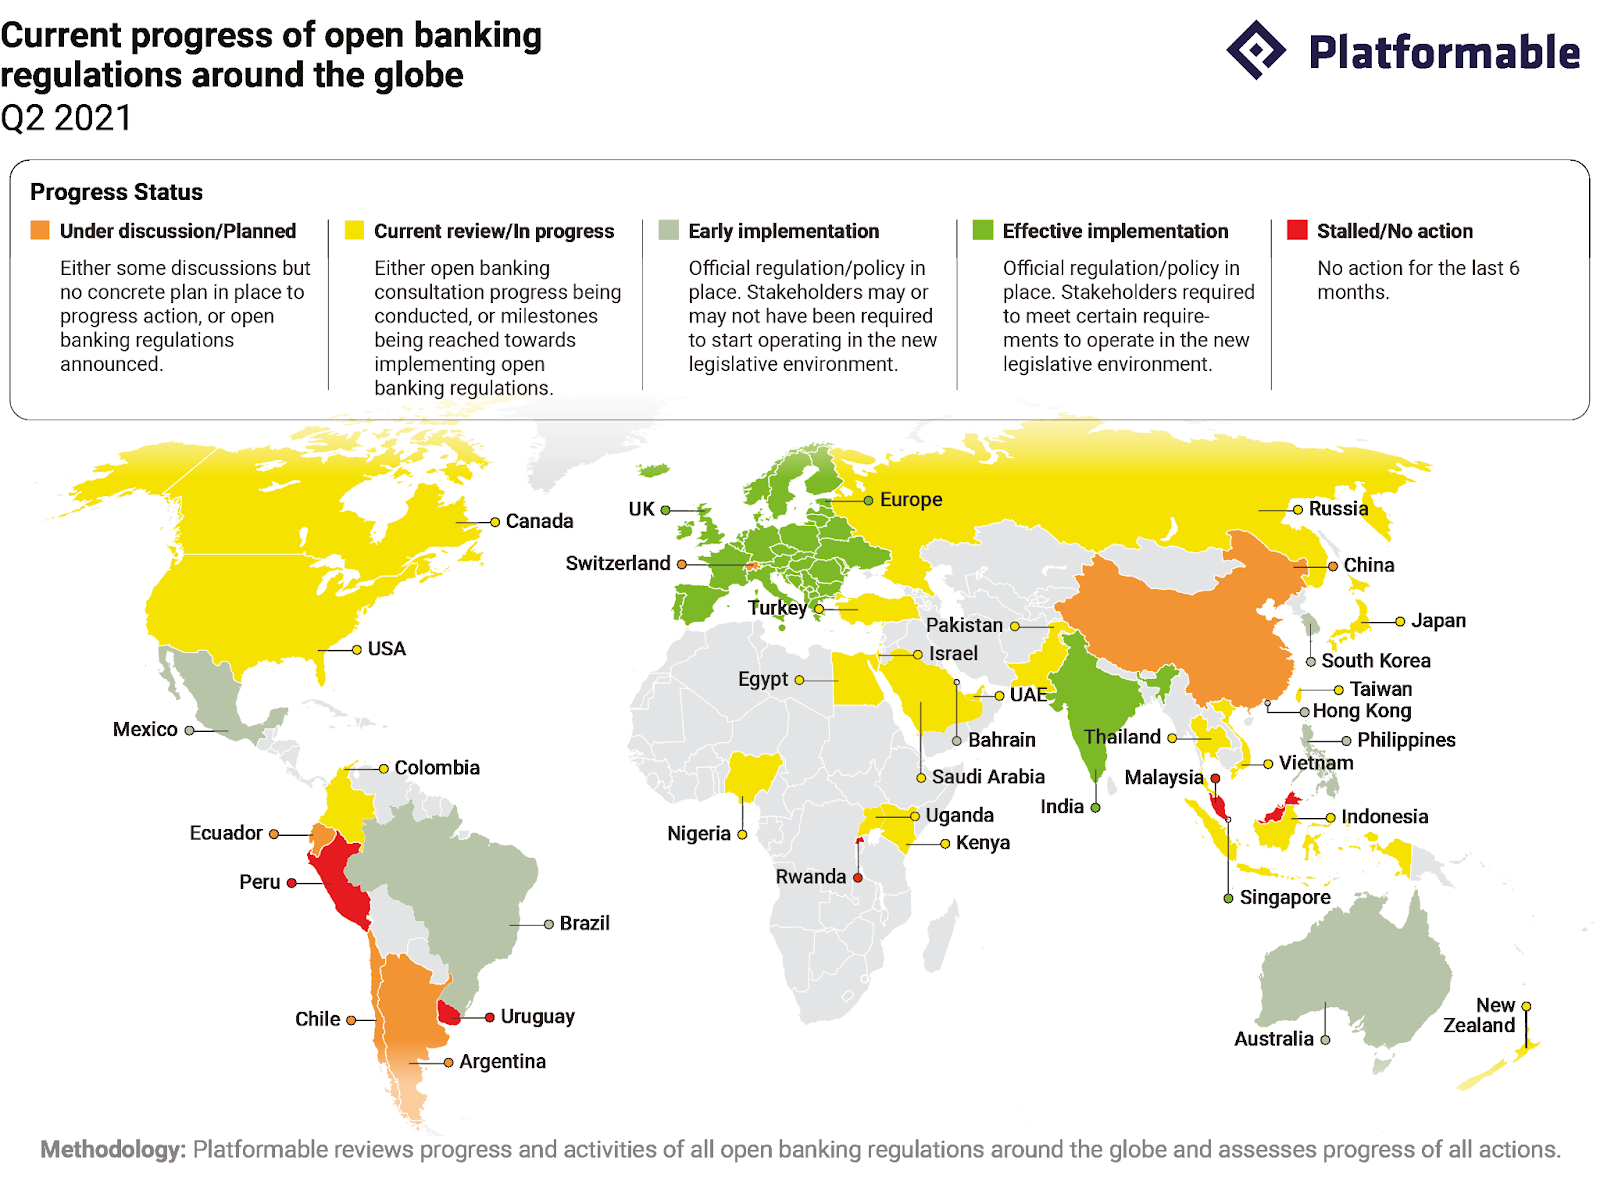 A world map showing the progress of open banking regulations.